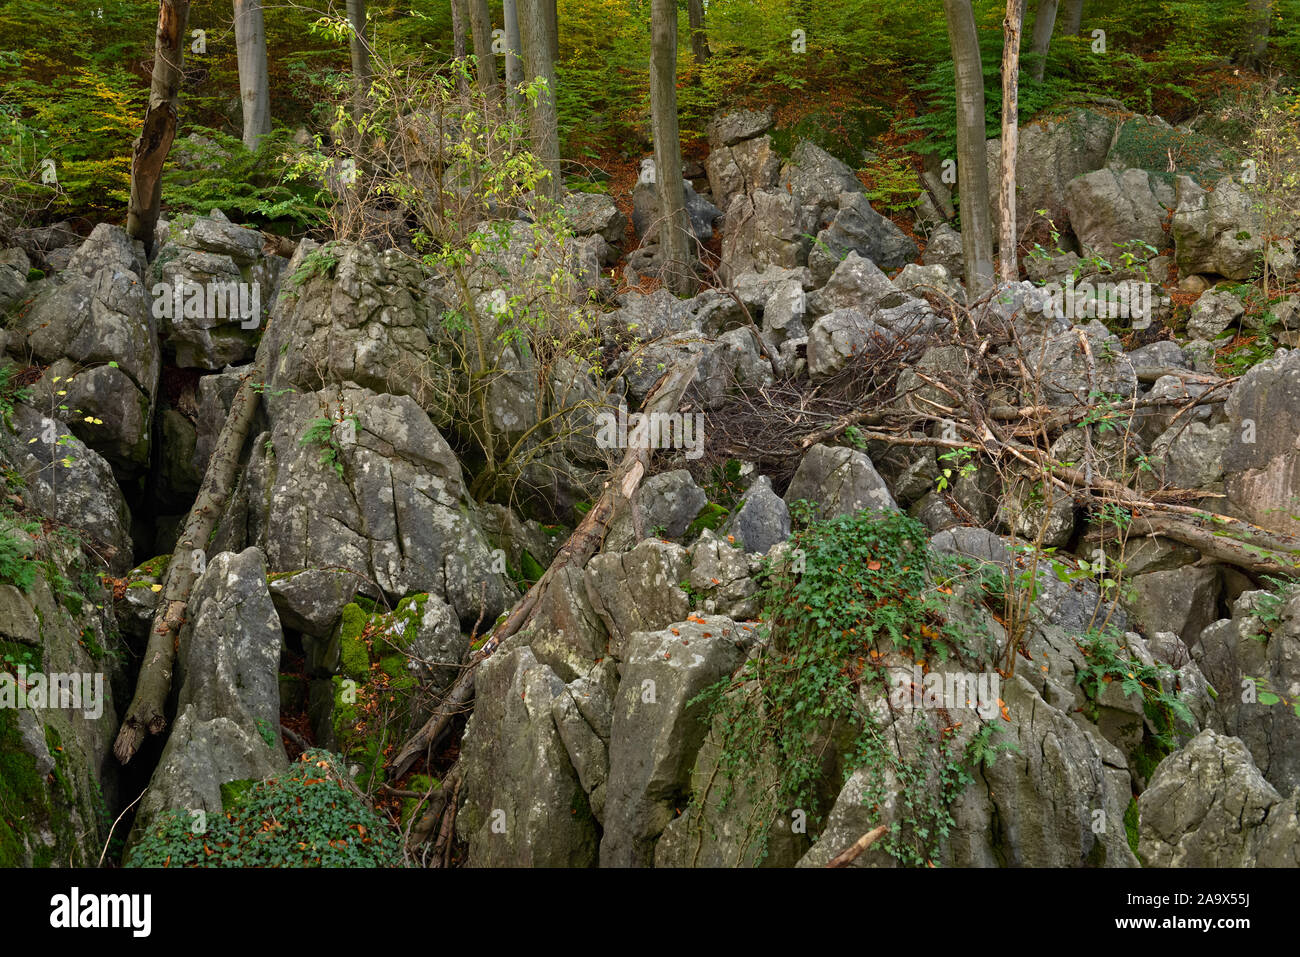 Felsenmeer, famous Nature Reserve, National Geotope, sea of rocks, rock chaos with old beeches and dead wood of Hemer, Germany, Europe. Stock Photo